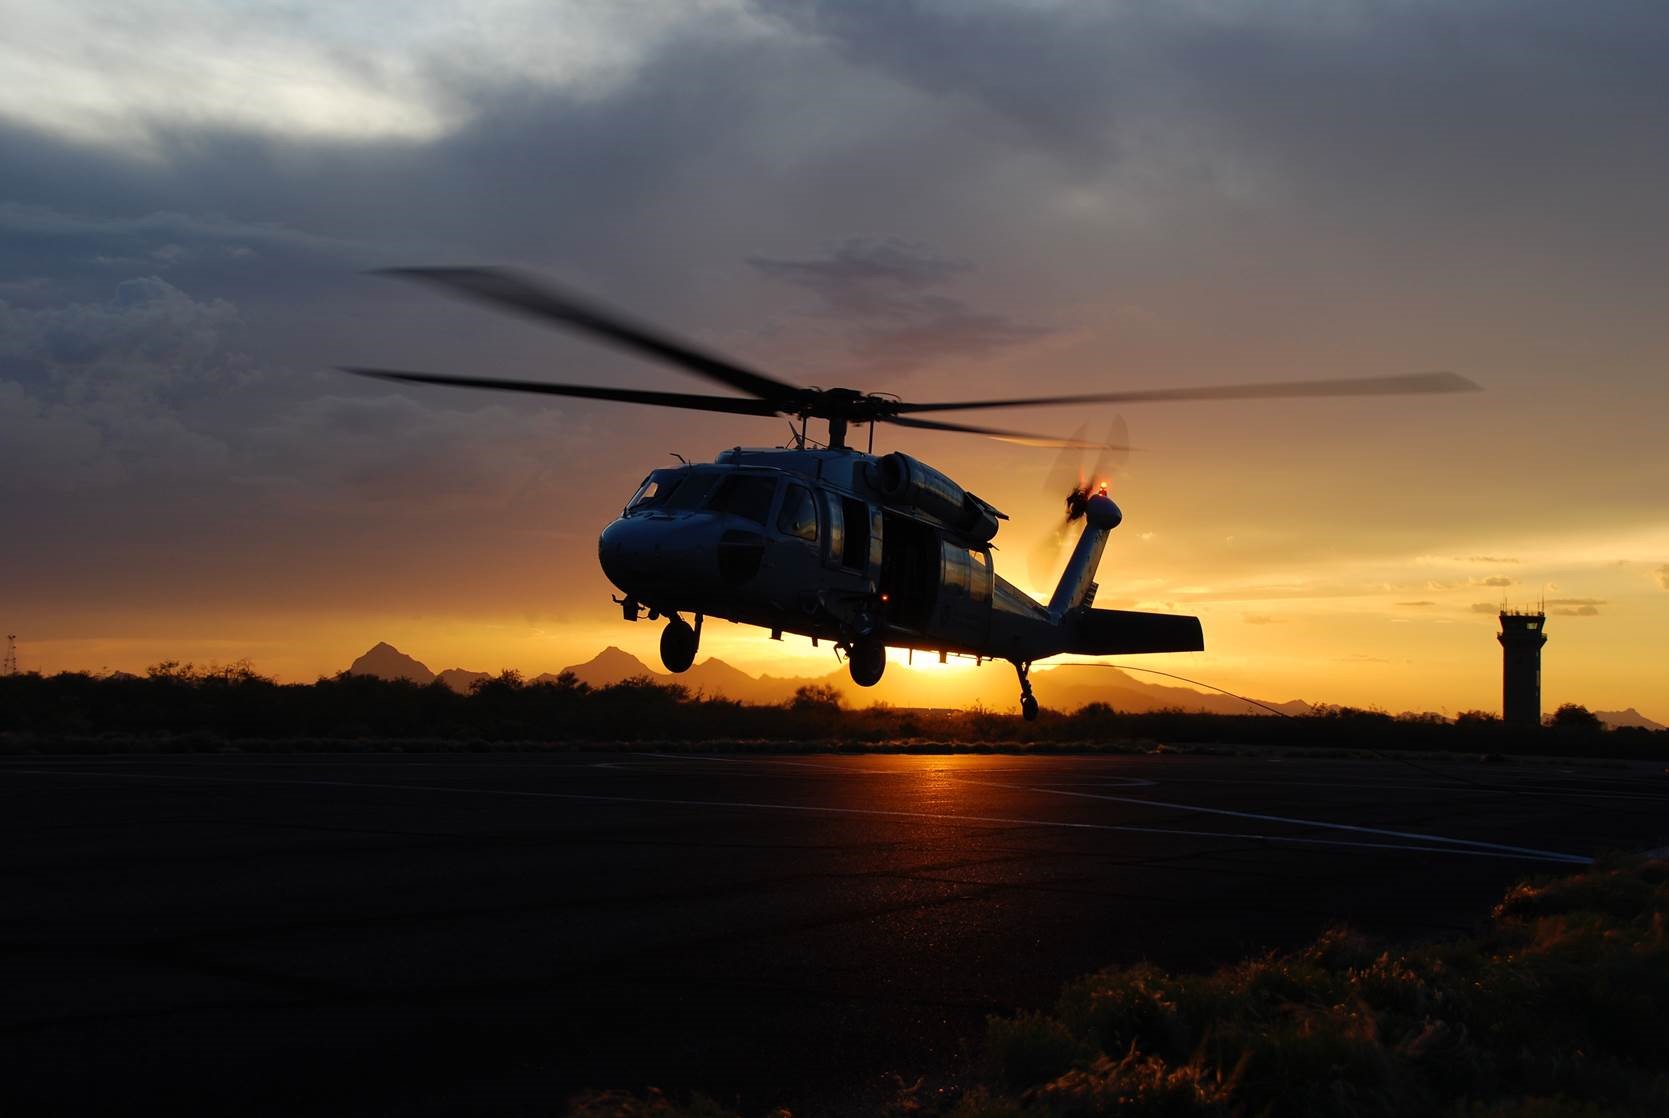 An Air and Marine Operations UH-60 crew takes off during a desert sunset near Tucson, Arizona. 